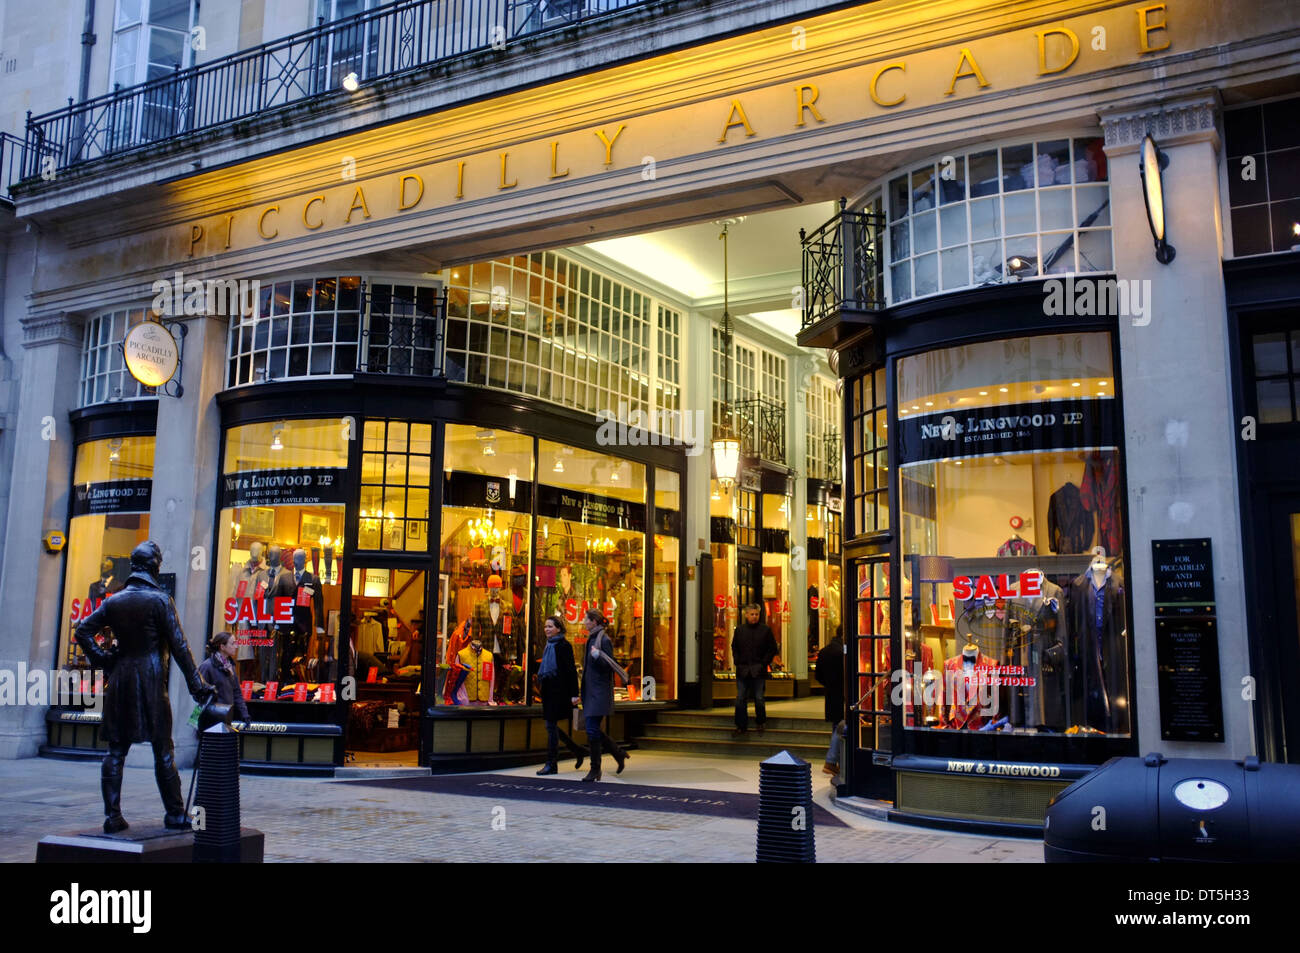 Piccadilly Arcade, luxury boutiques, London Stock Photo